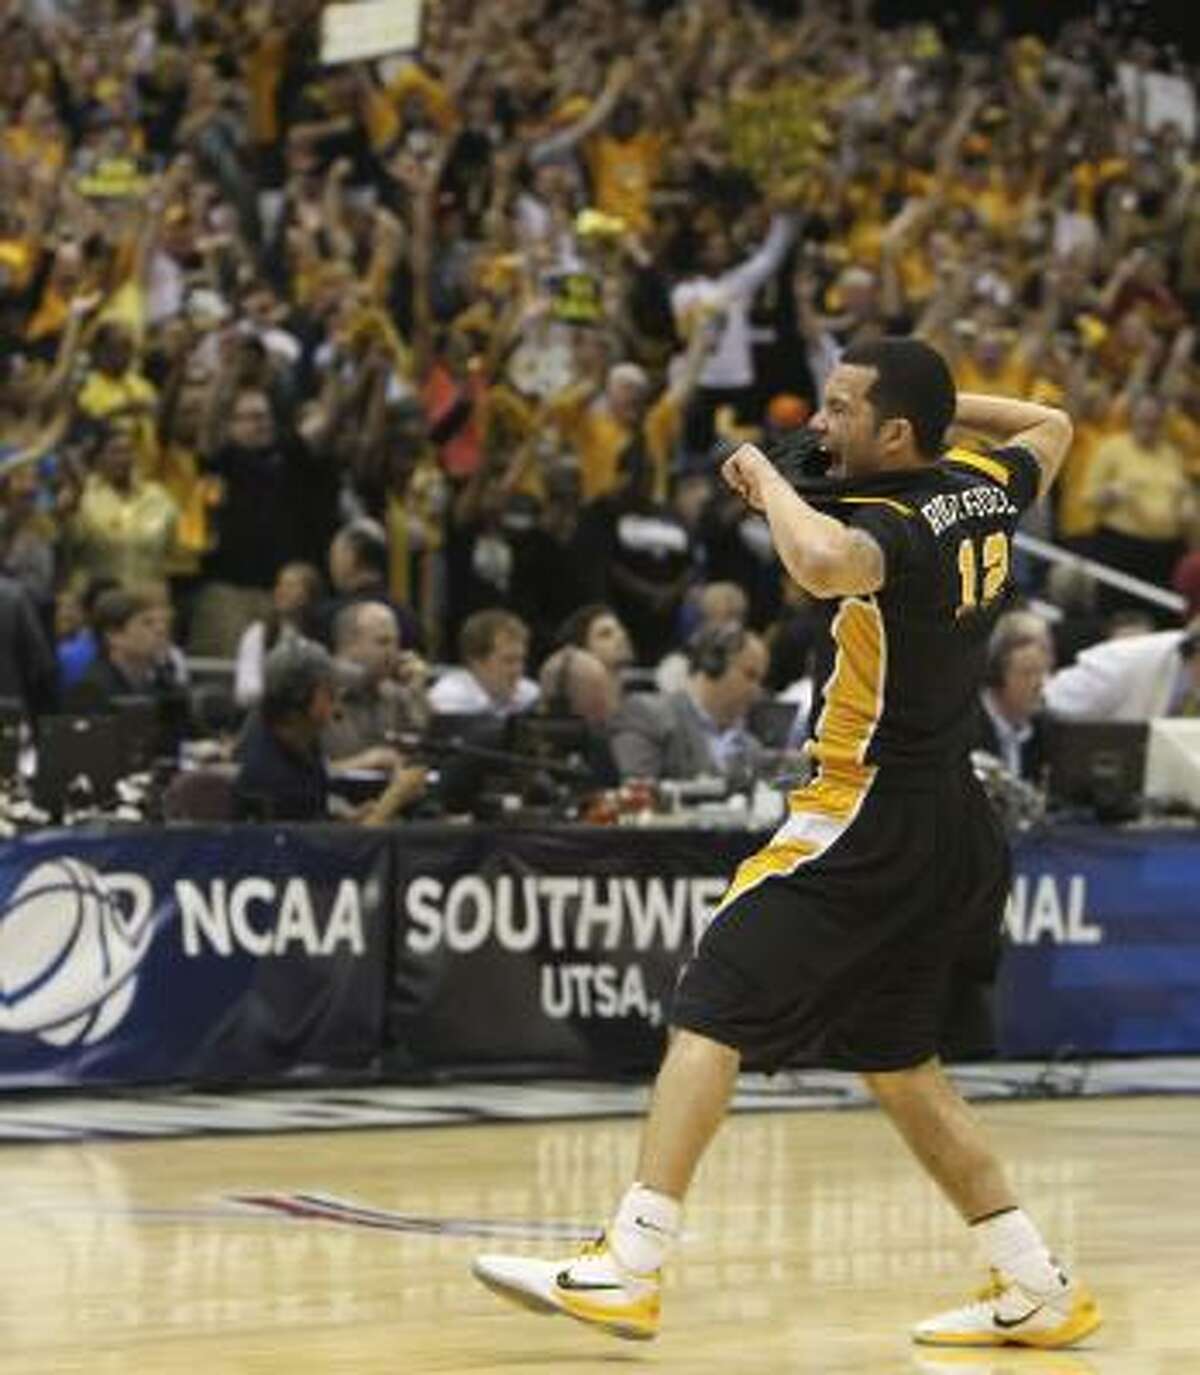 Having won five tournament games, Joey Rodriguez and the VCU Rams took the road less traveled to Reliant.